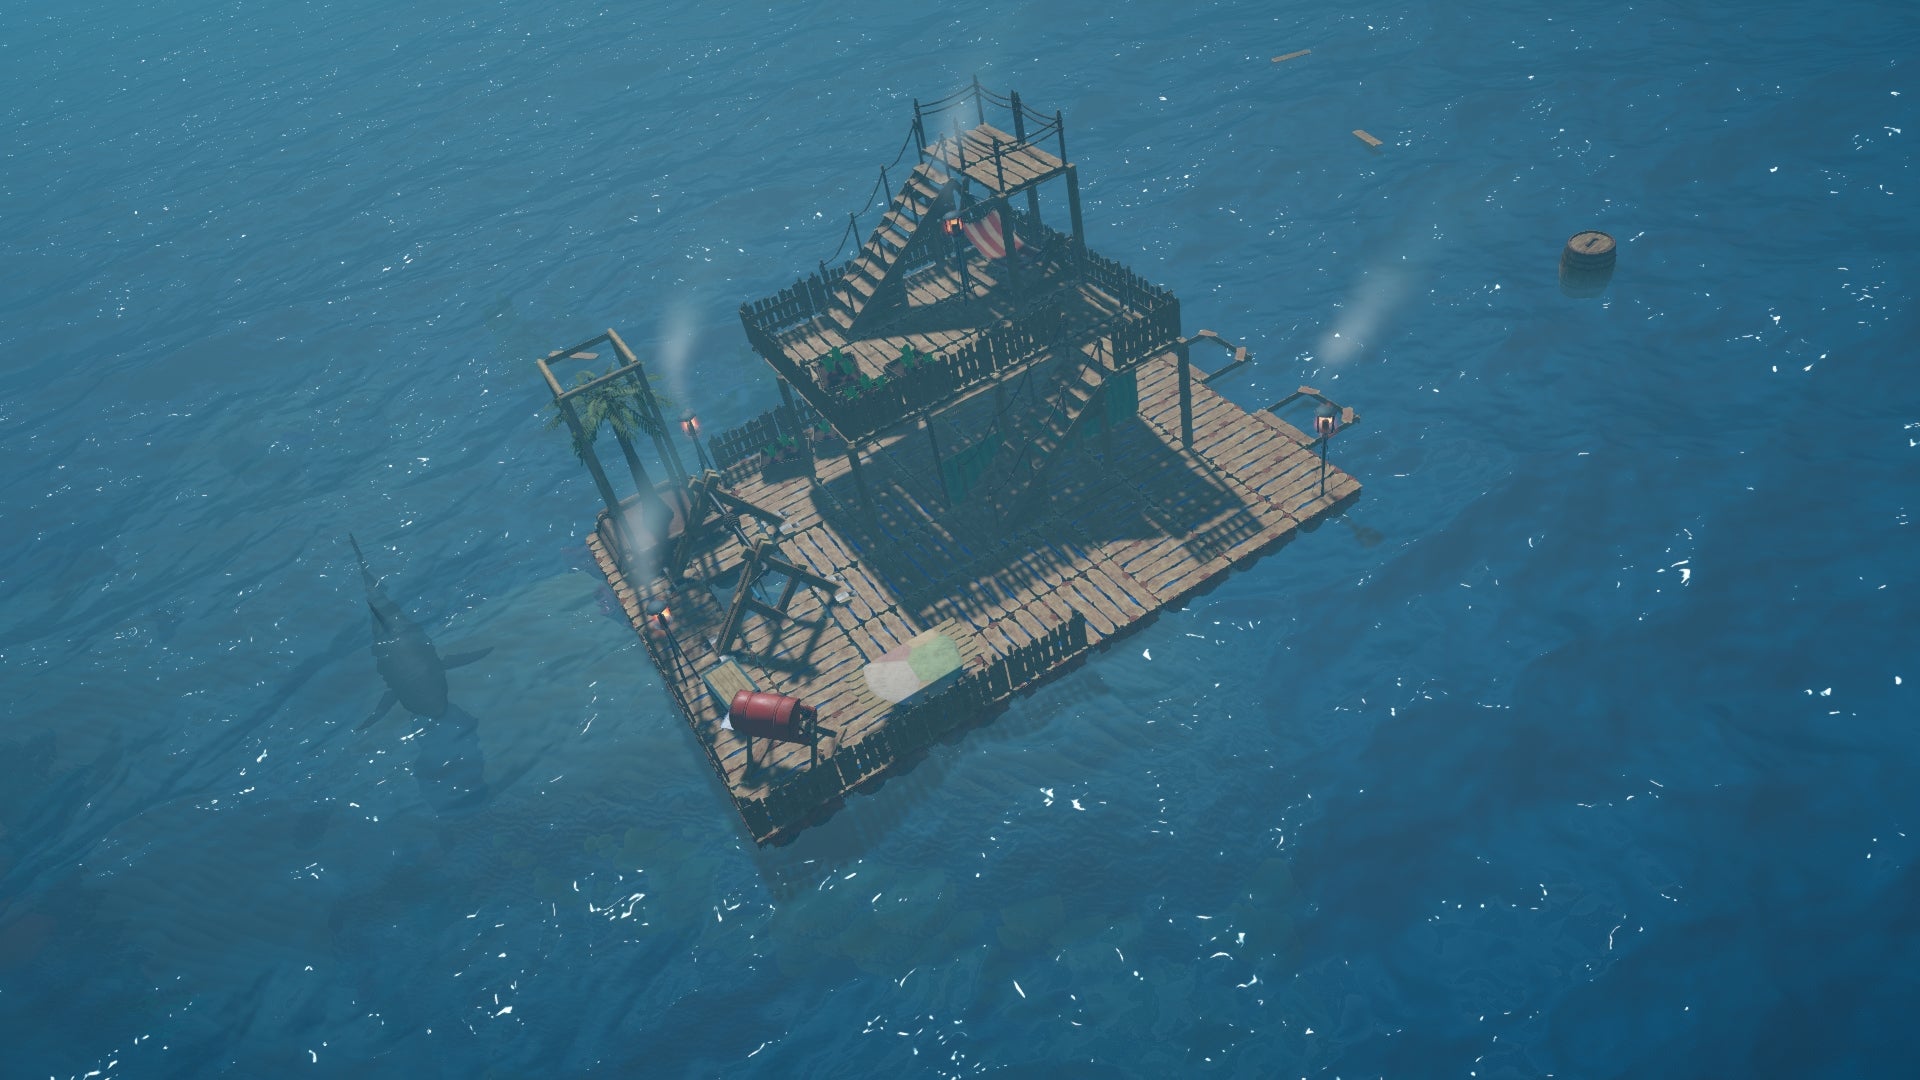 An enhanced raft can be seen floating in the ocean with a shark and a barrel beside it in Raft.